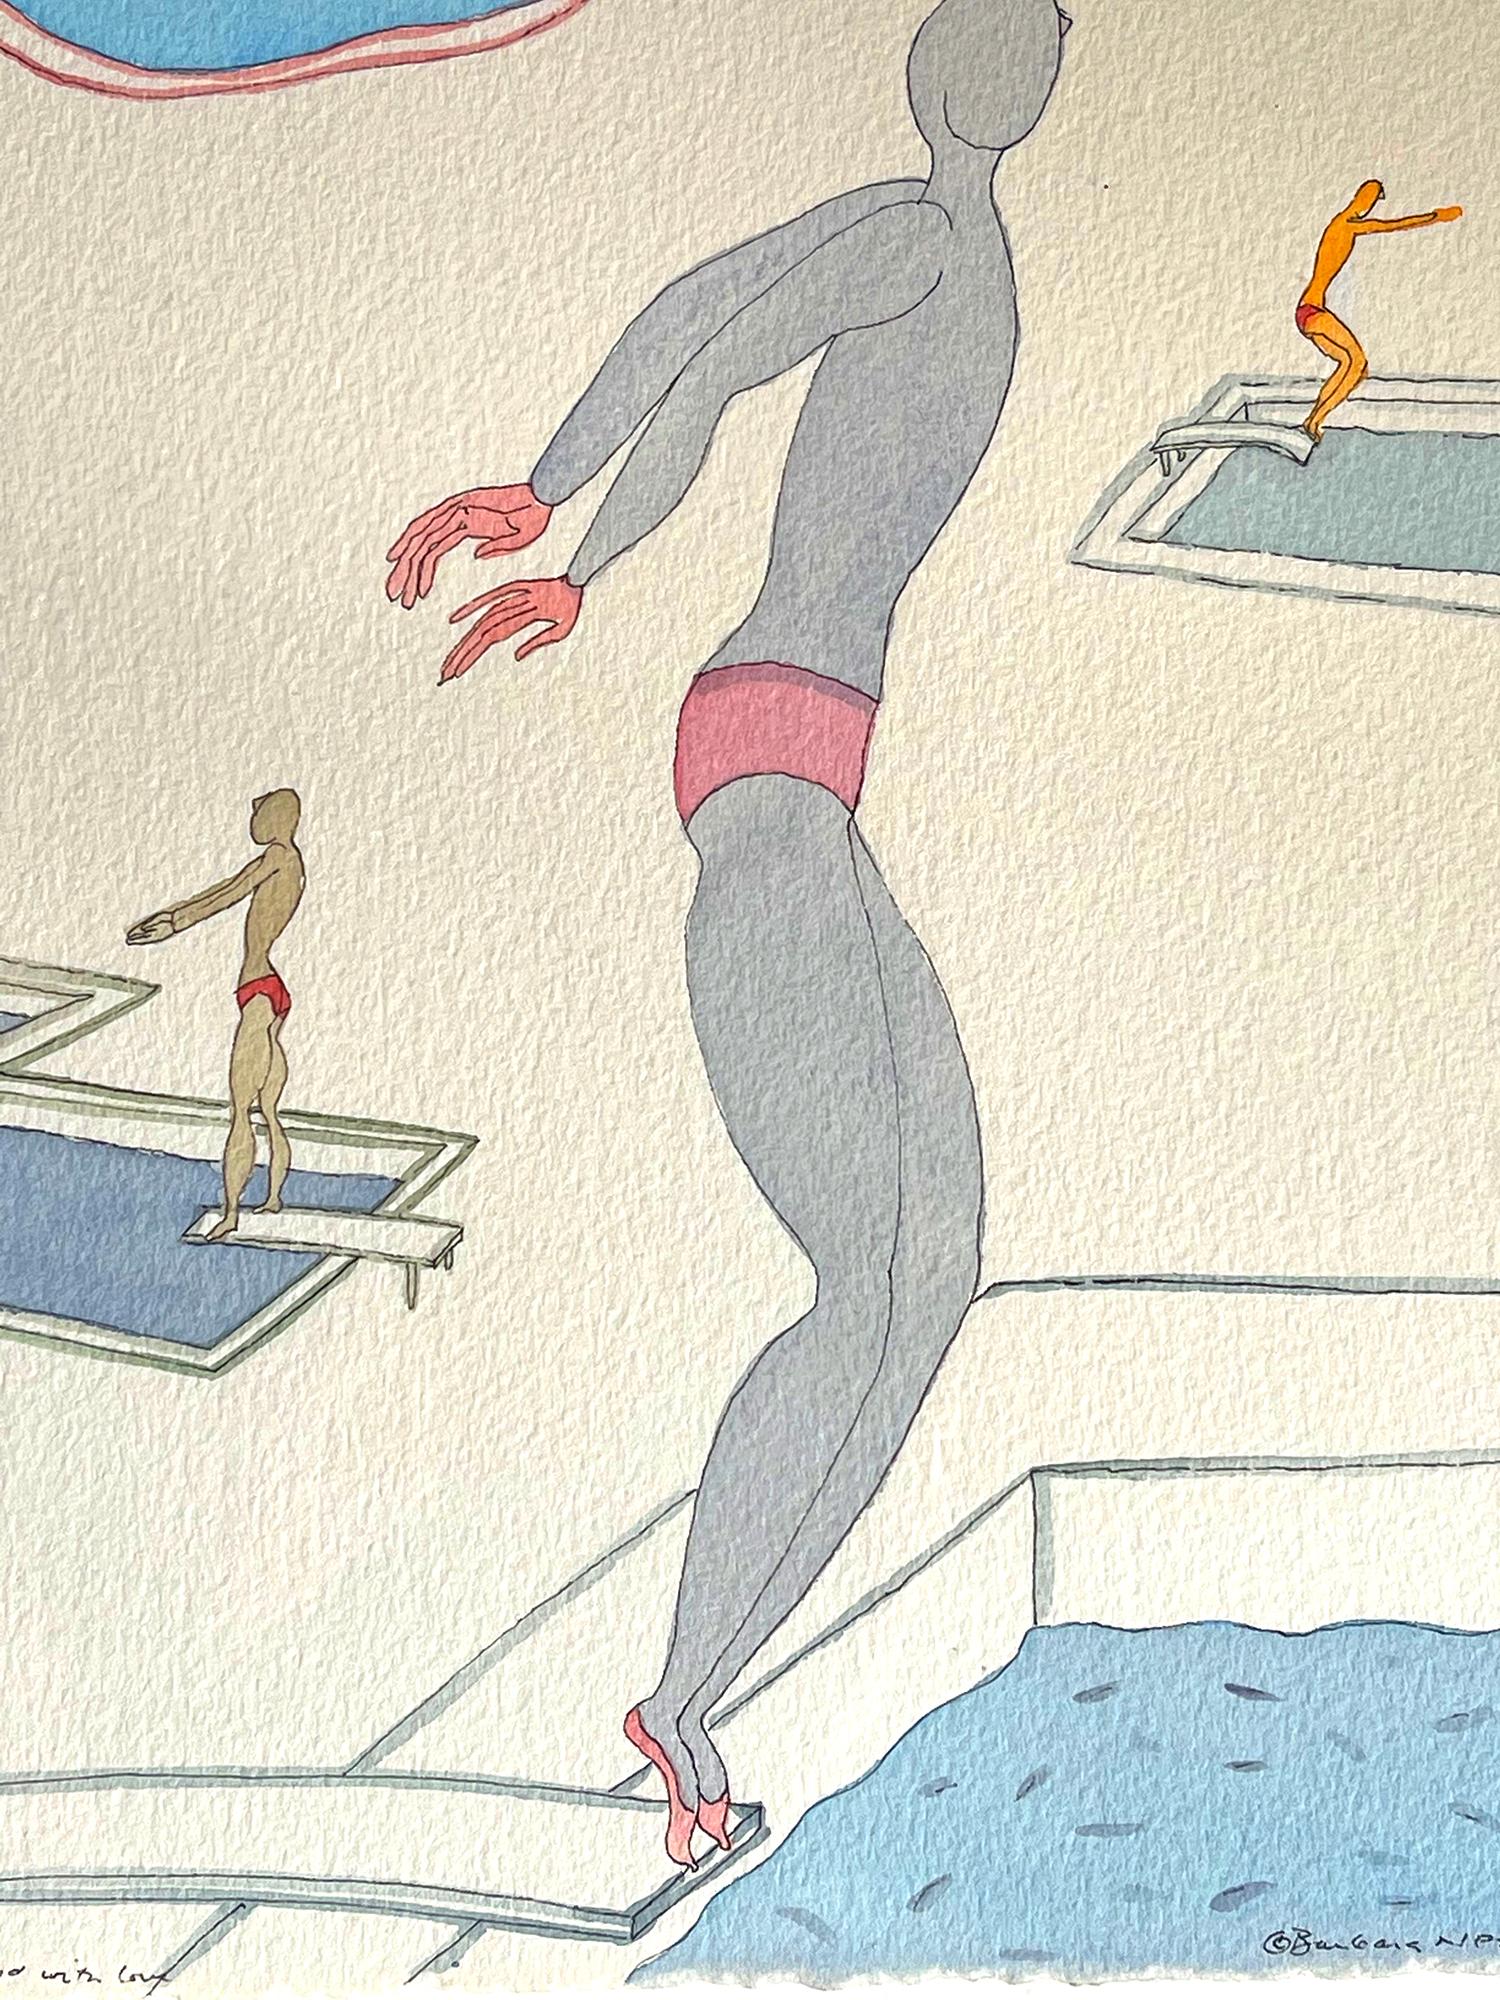      Swimmers and Divers - Women Illustrators - Art by Barbara Nessim